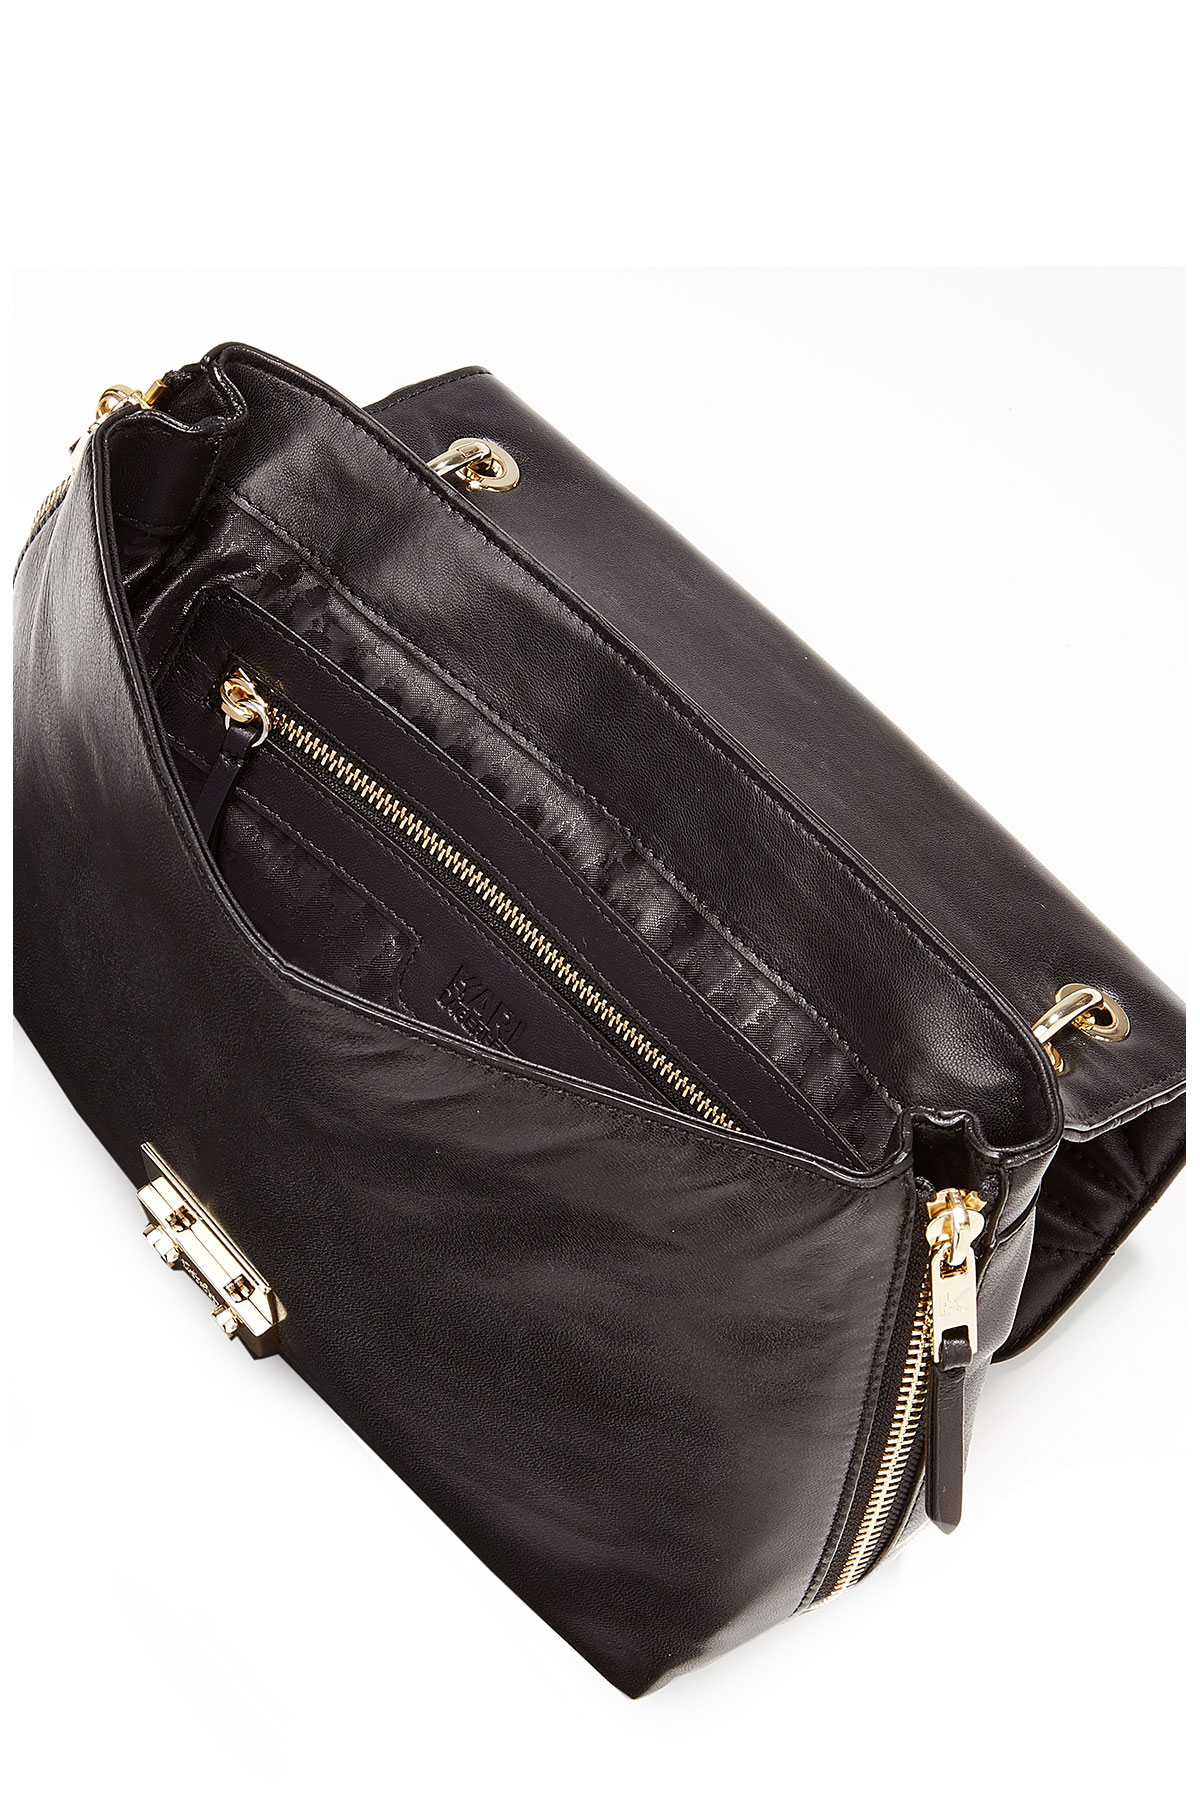 Karl lagerfeld Quilted Leather Shoulder Bag in Black | Lyst